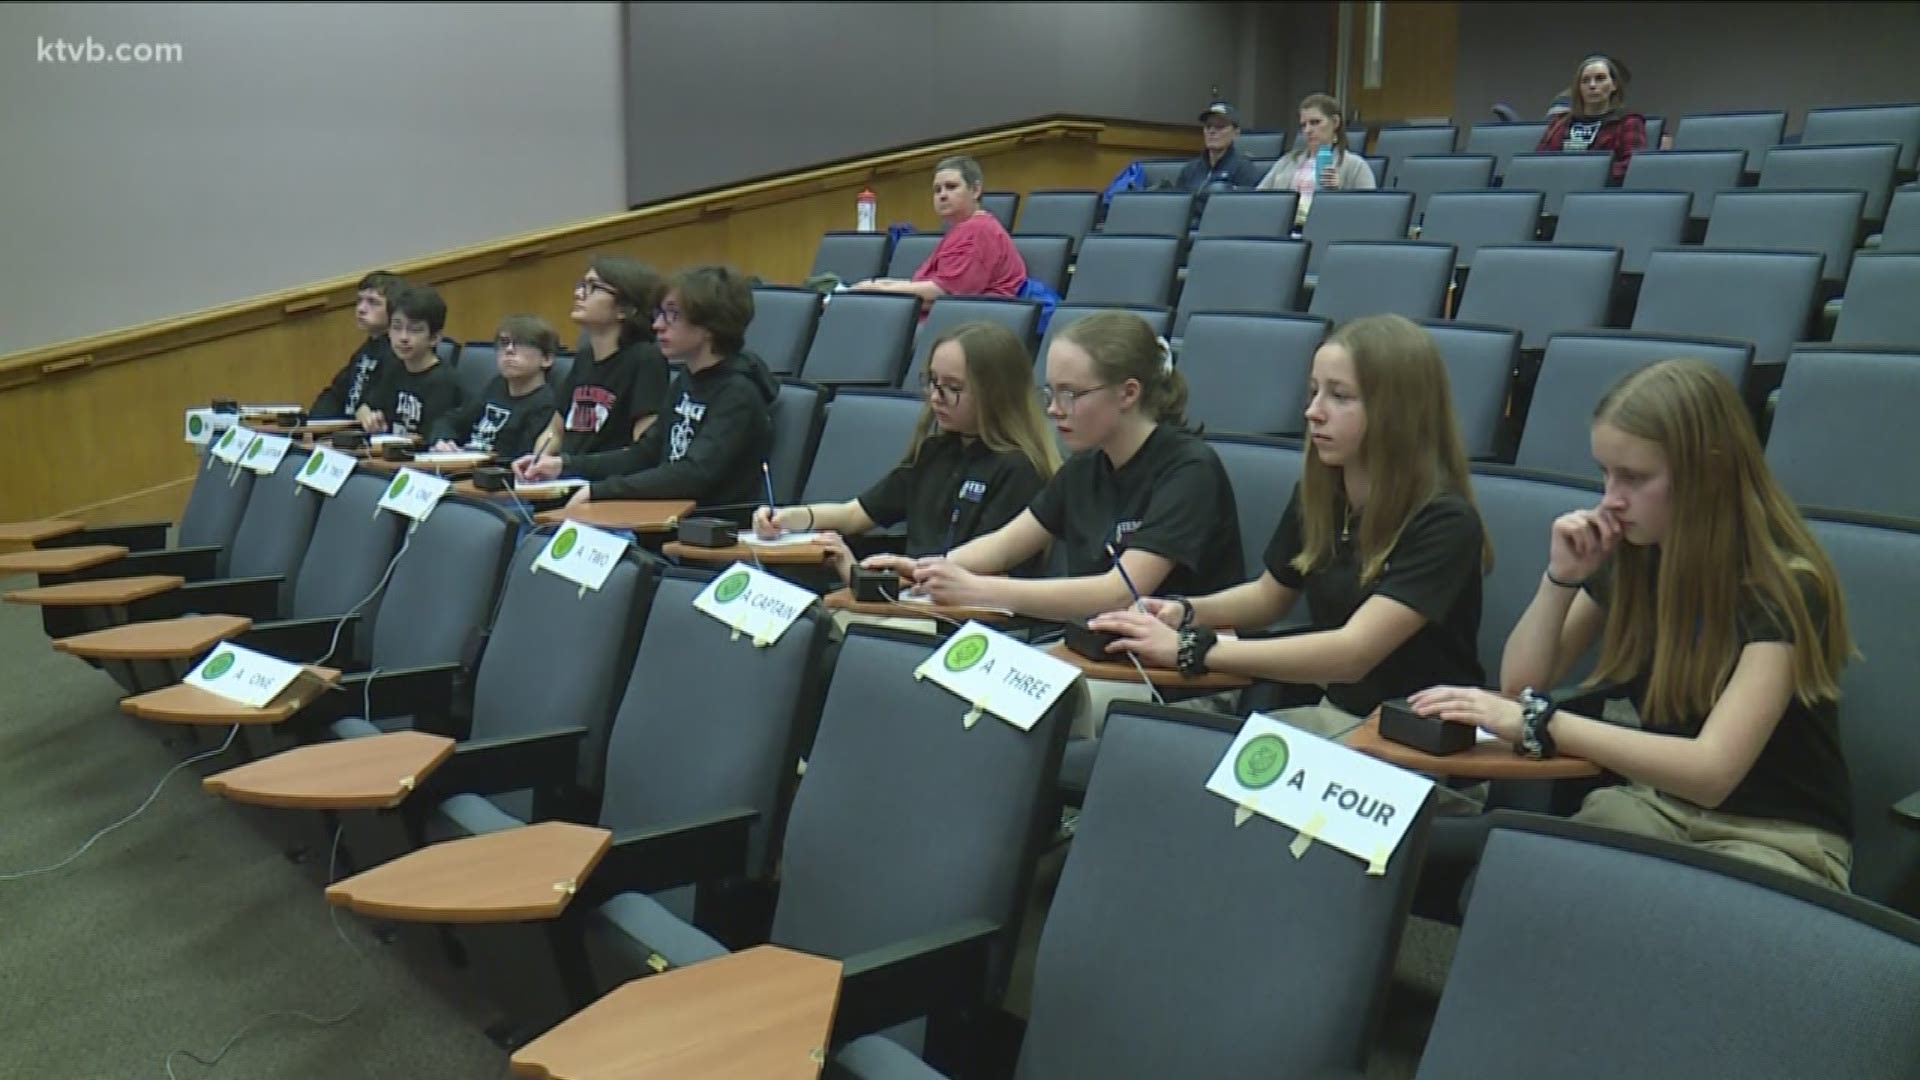 The middle school team who wins the science bowl on Saturday will travel to Washington D.C. for an all-expenses-paid trip for five days to represent western Idaho.